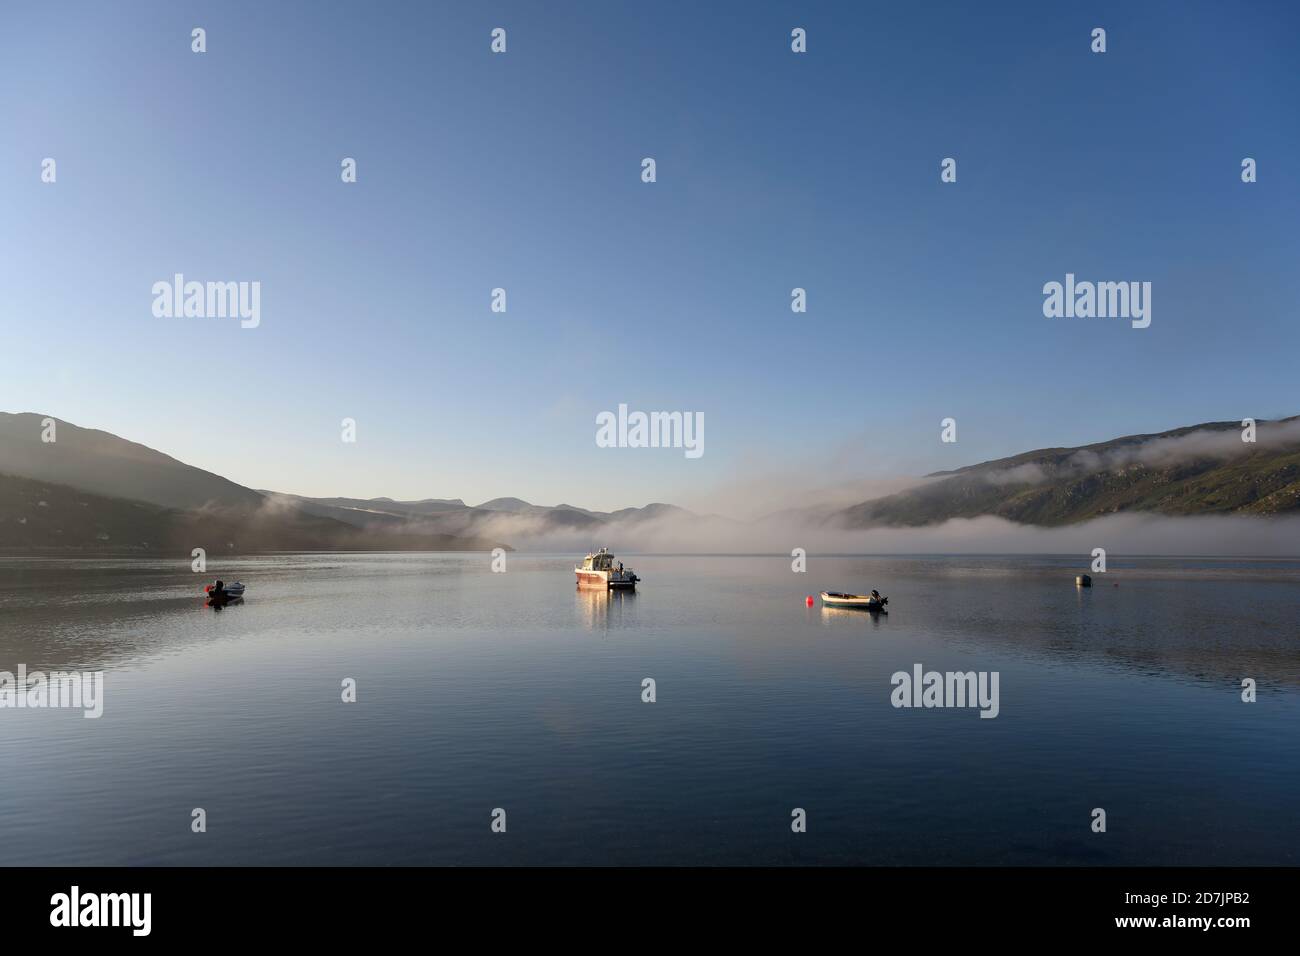 UK, Scotland, Ullapool, Clear sky over boats floating in Loch Broom during foggy weather Stock Photo